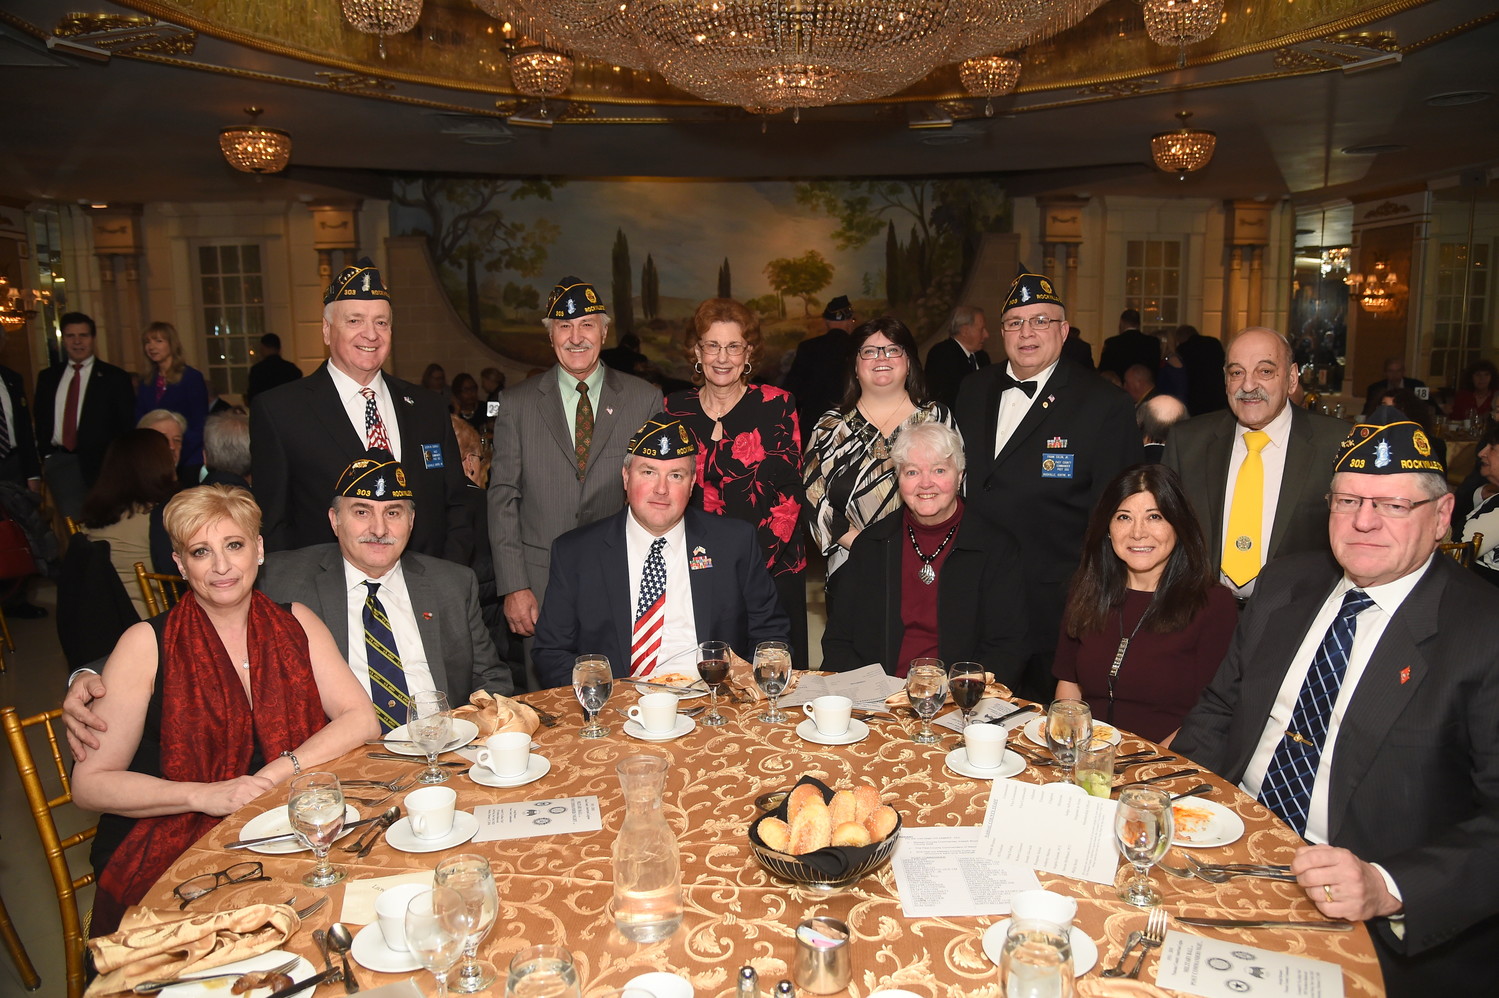 Members of the Rockville Centre American Legion Post 303 attended the event in Great Neck on Feb. 17.